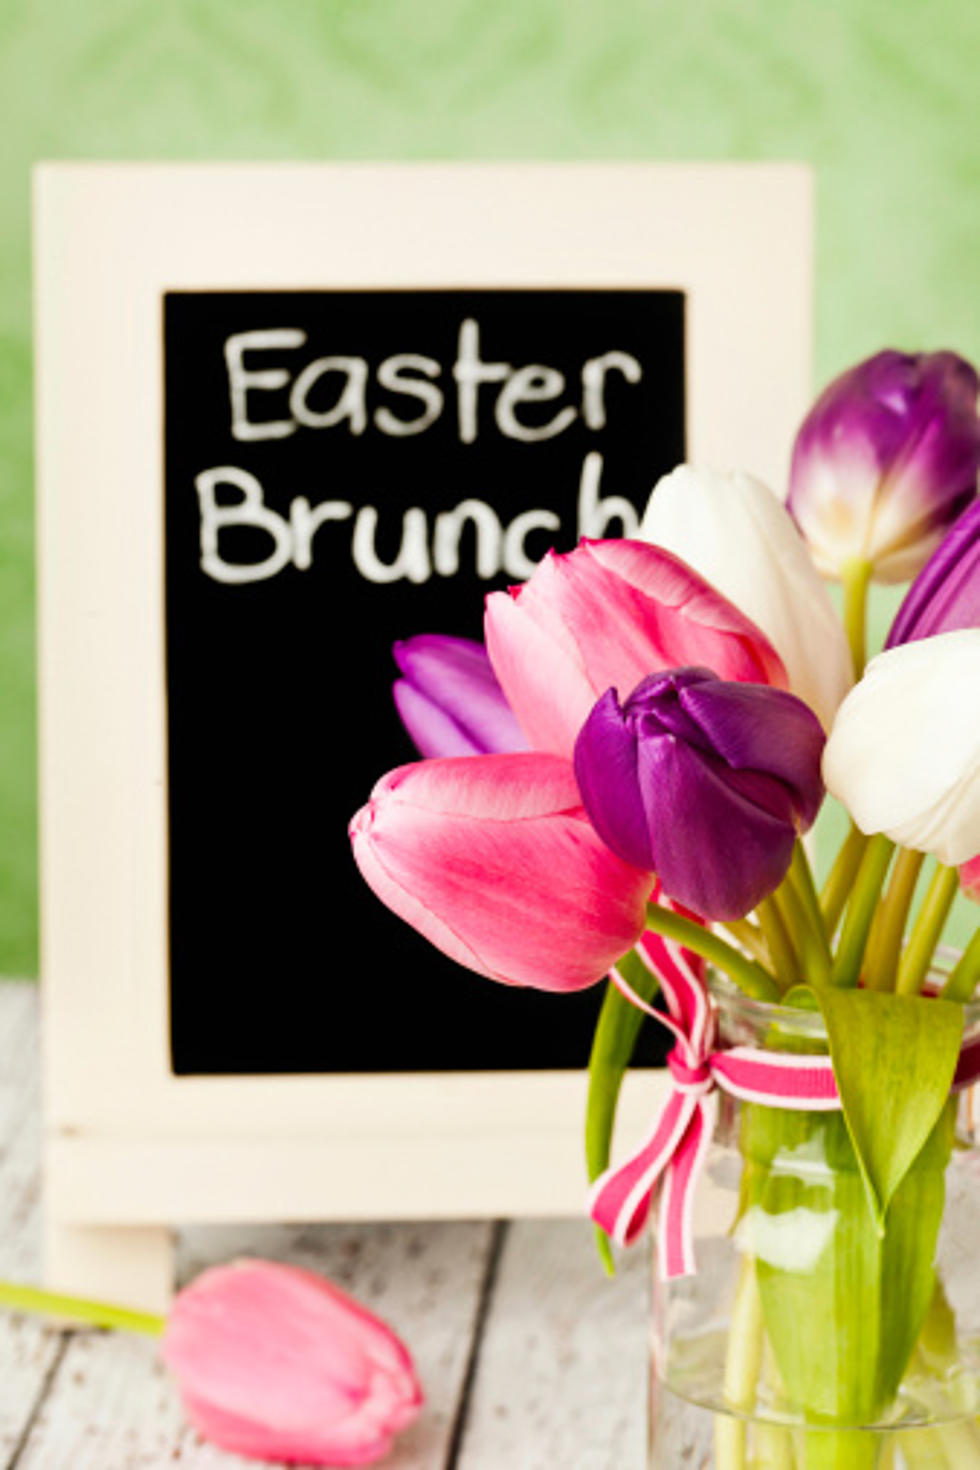 2017 Places for Easter Brunch in WNY [LIST]